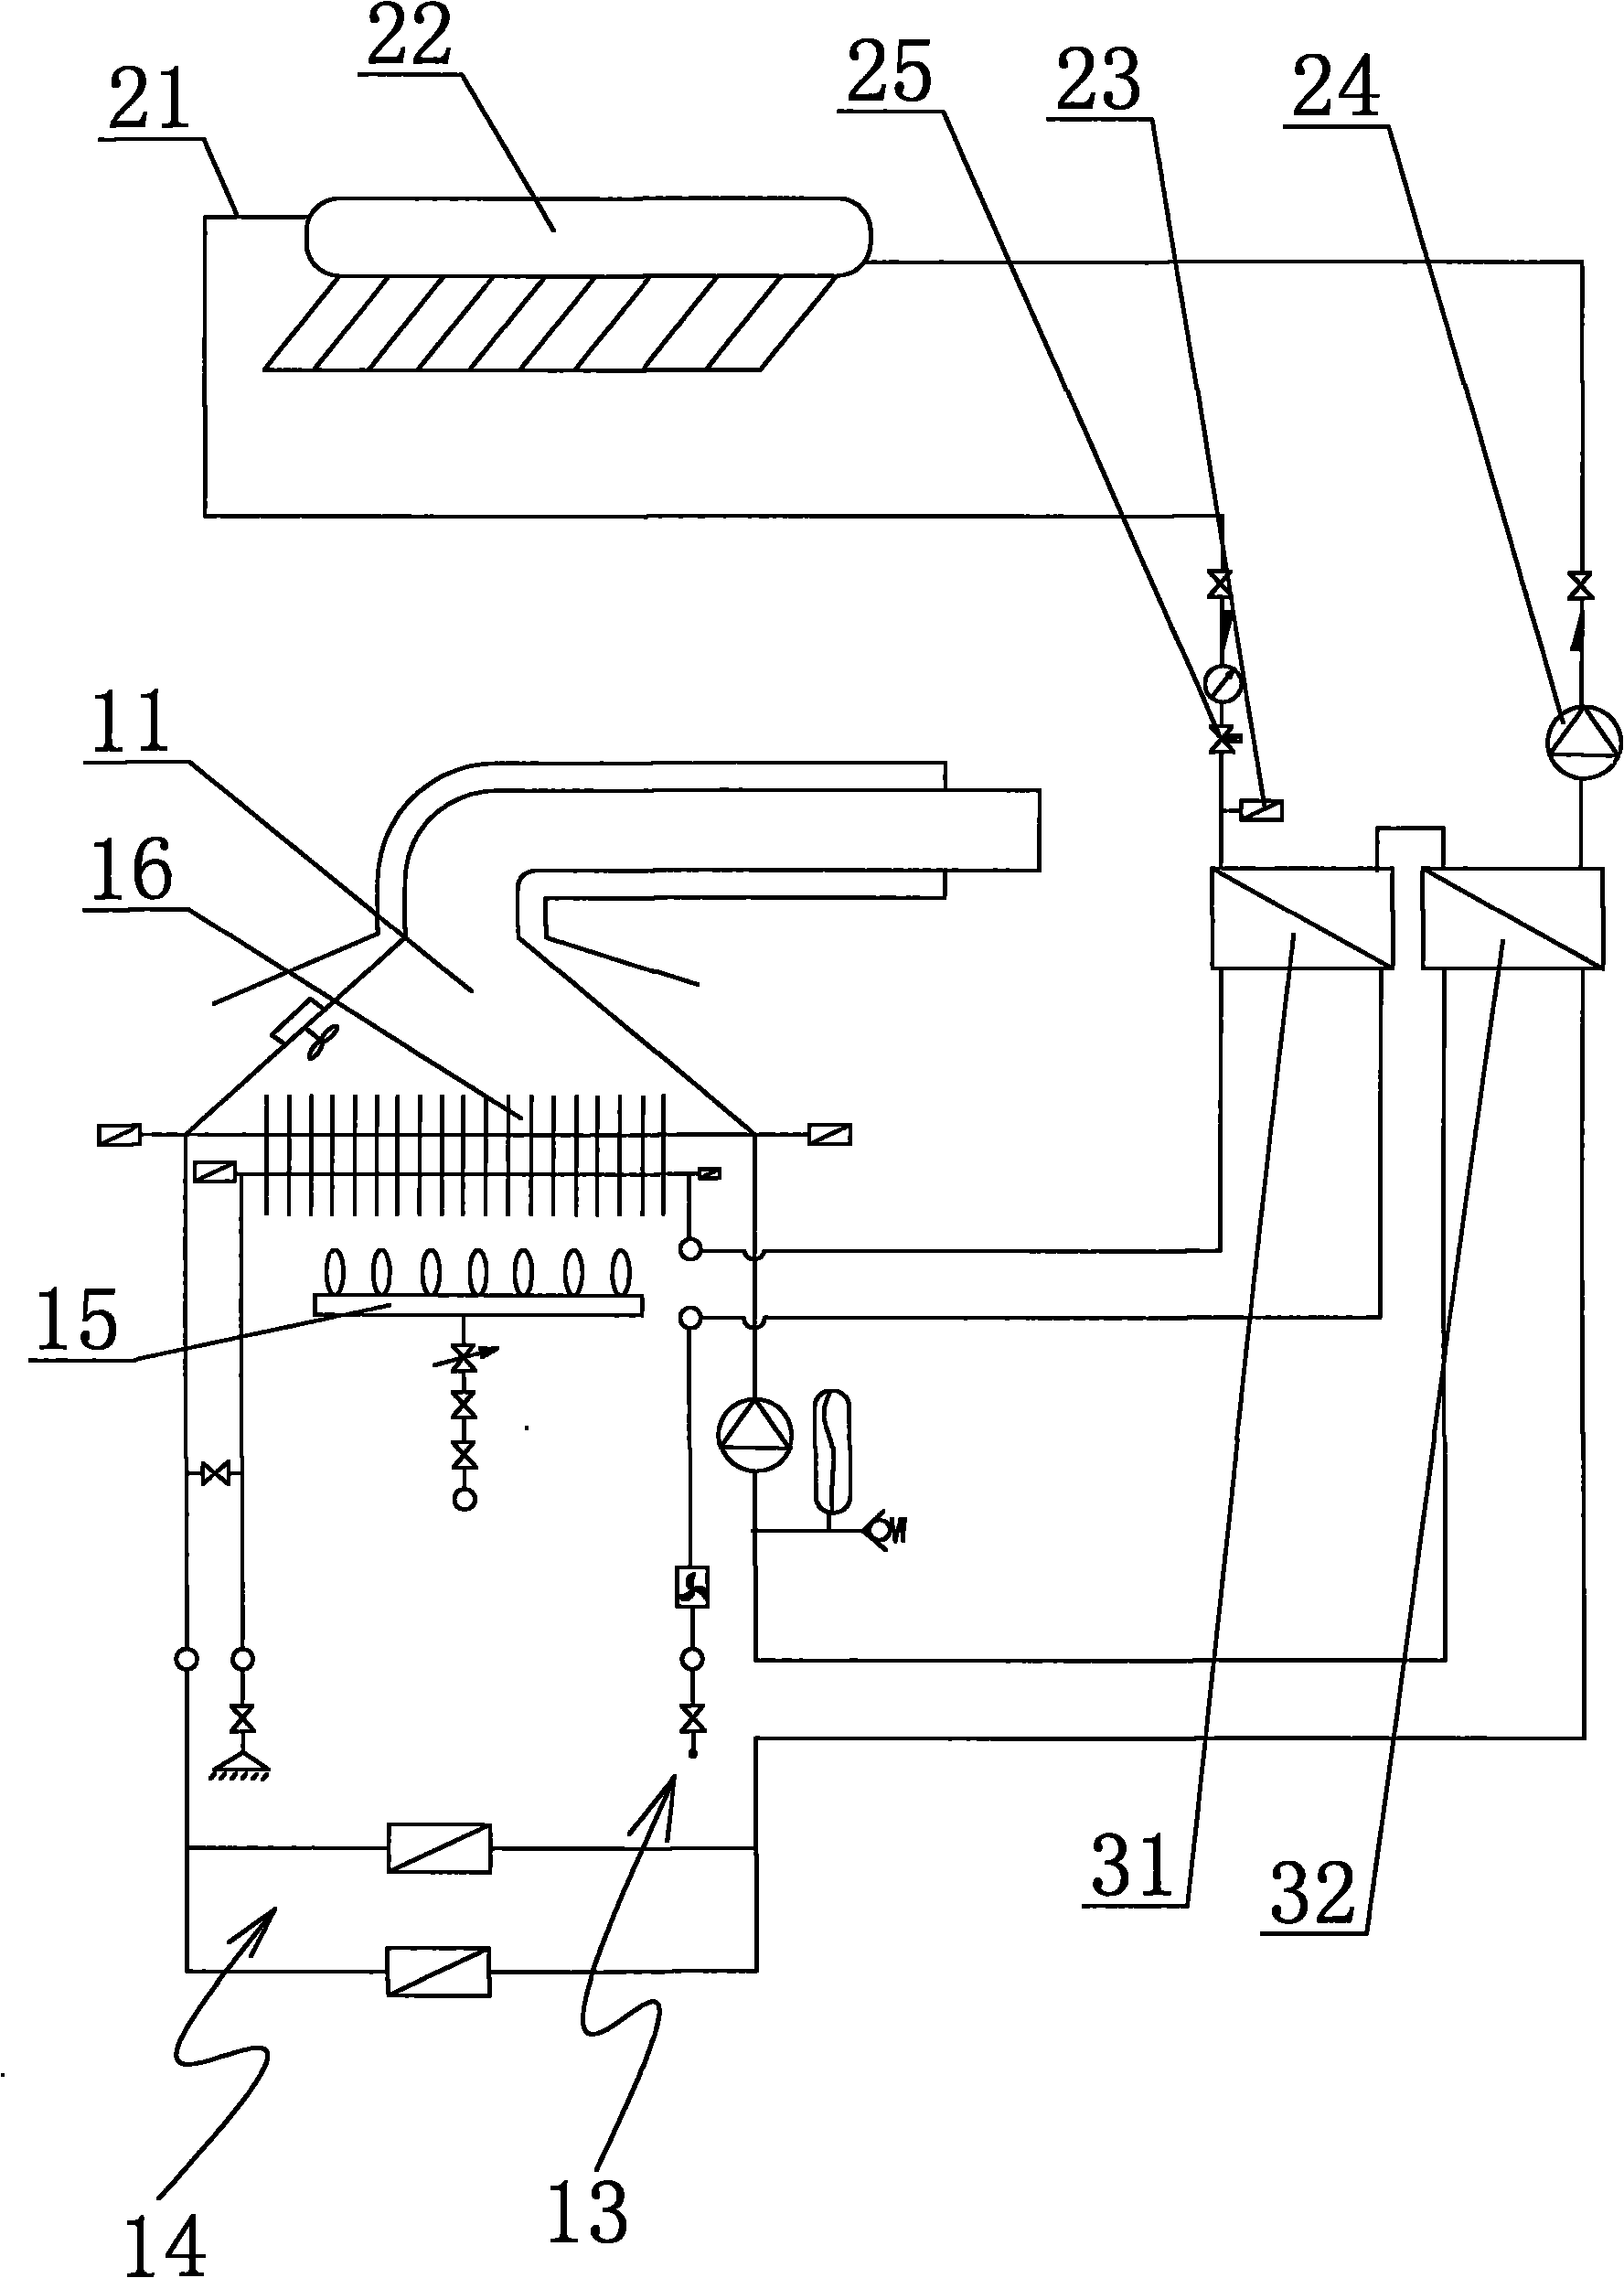 Dual-purpose water heating device capable of heating and heating water